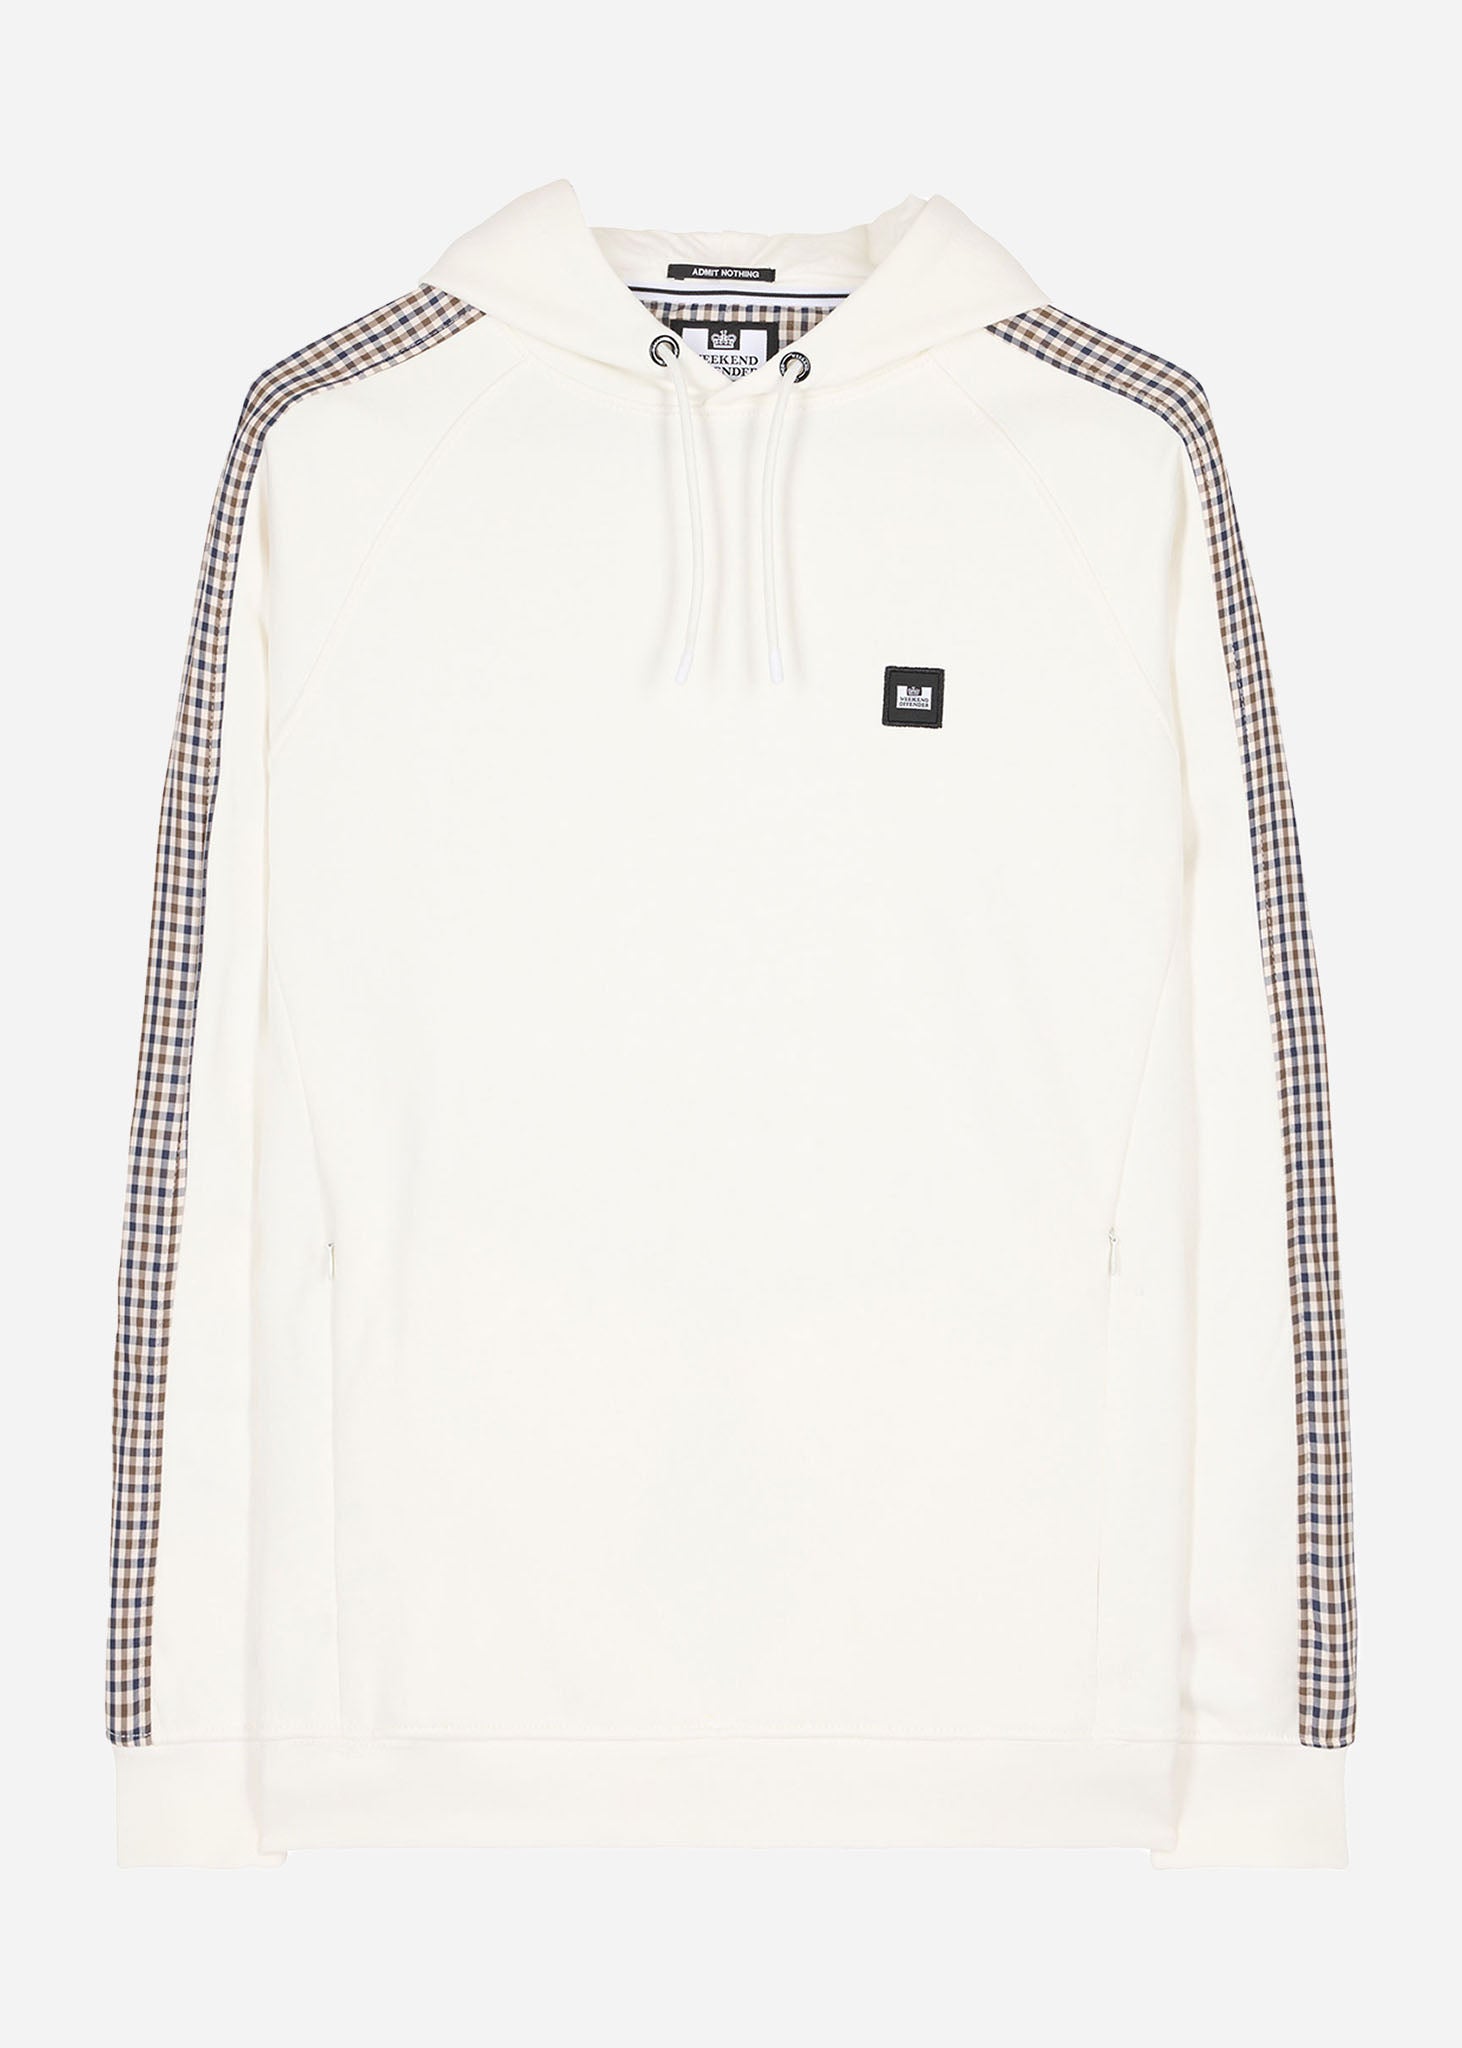 Weekend Offender Hoodies  Lo sung - winter white house check 